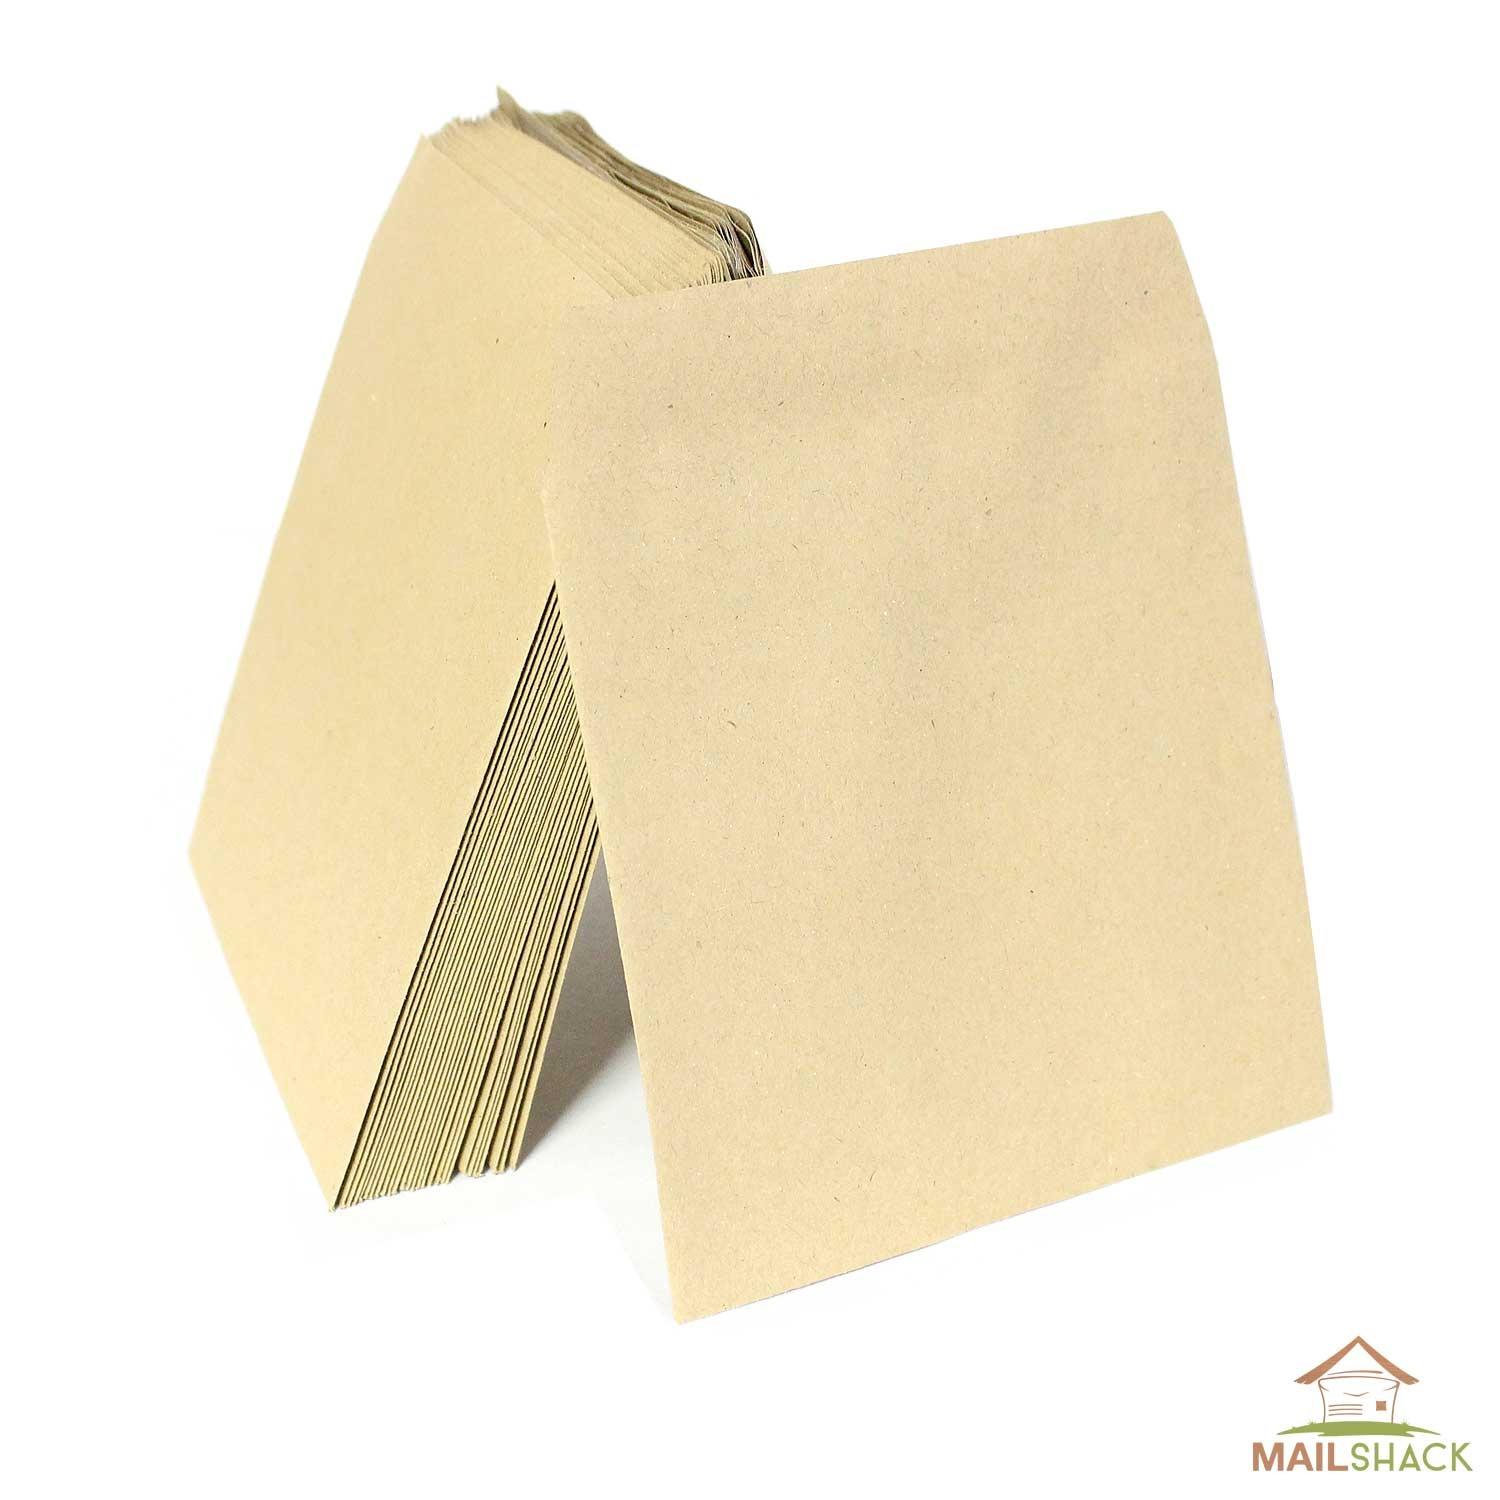 50 X SMALL BROWN MANILLA DINNER MONEY/WAGE/COIN/SEED WEDDING ENVELOPES 90GSM 100mmx62mm Supreme